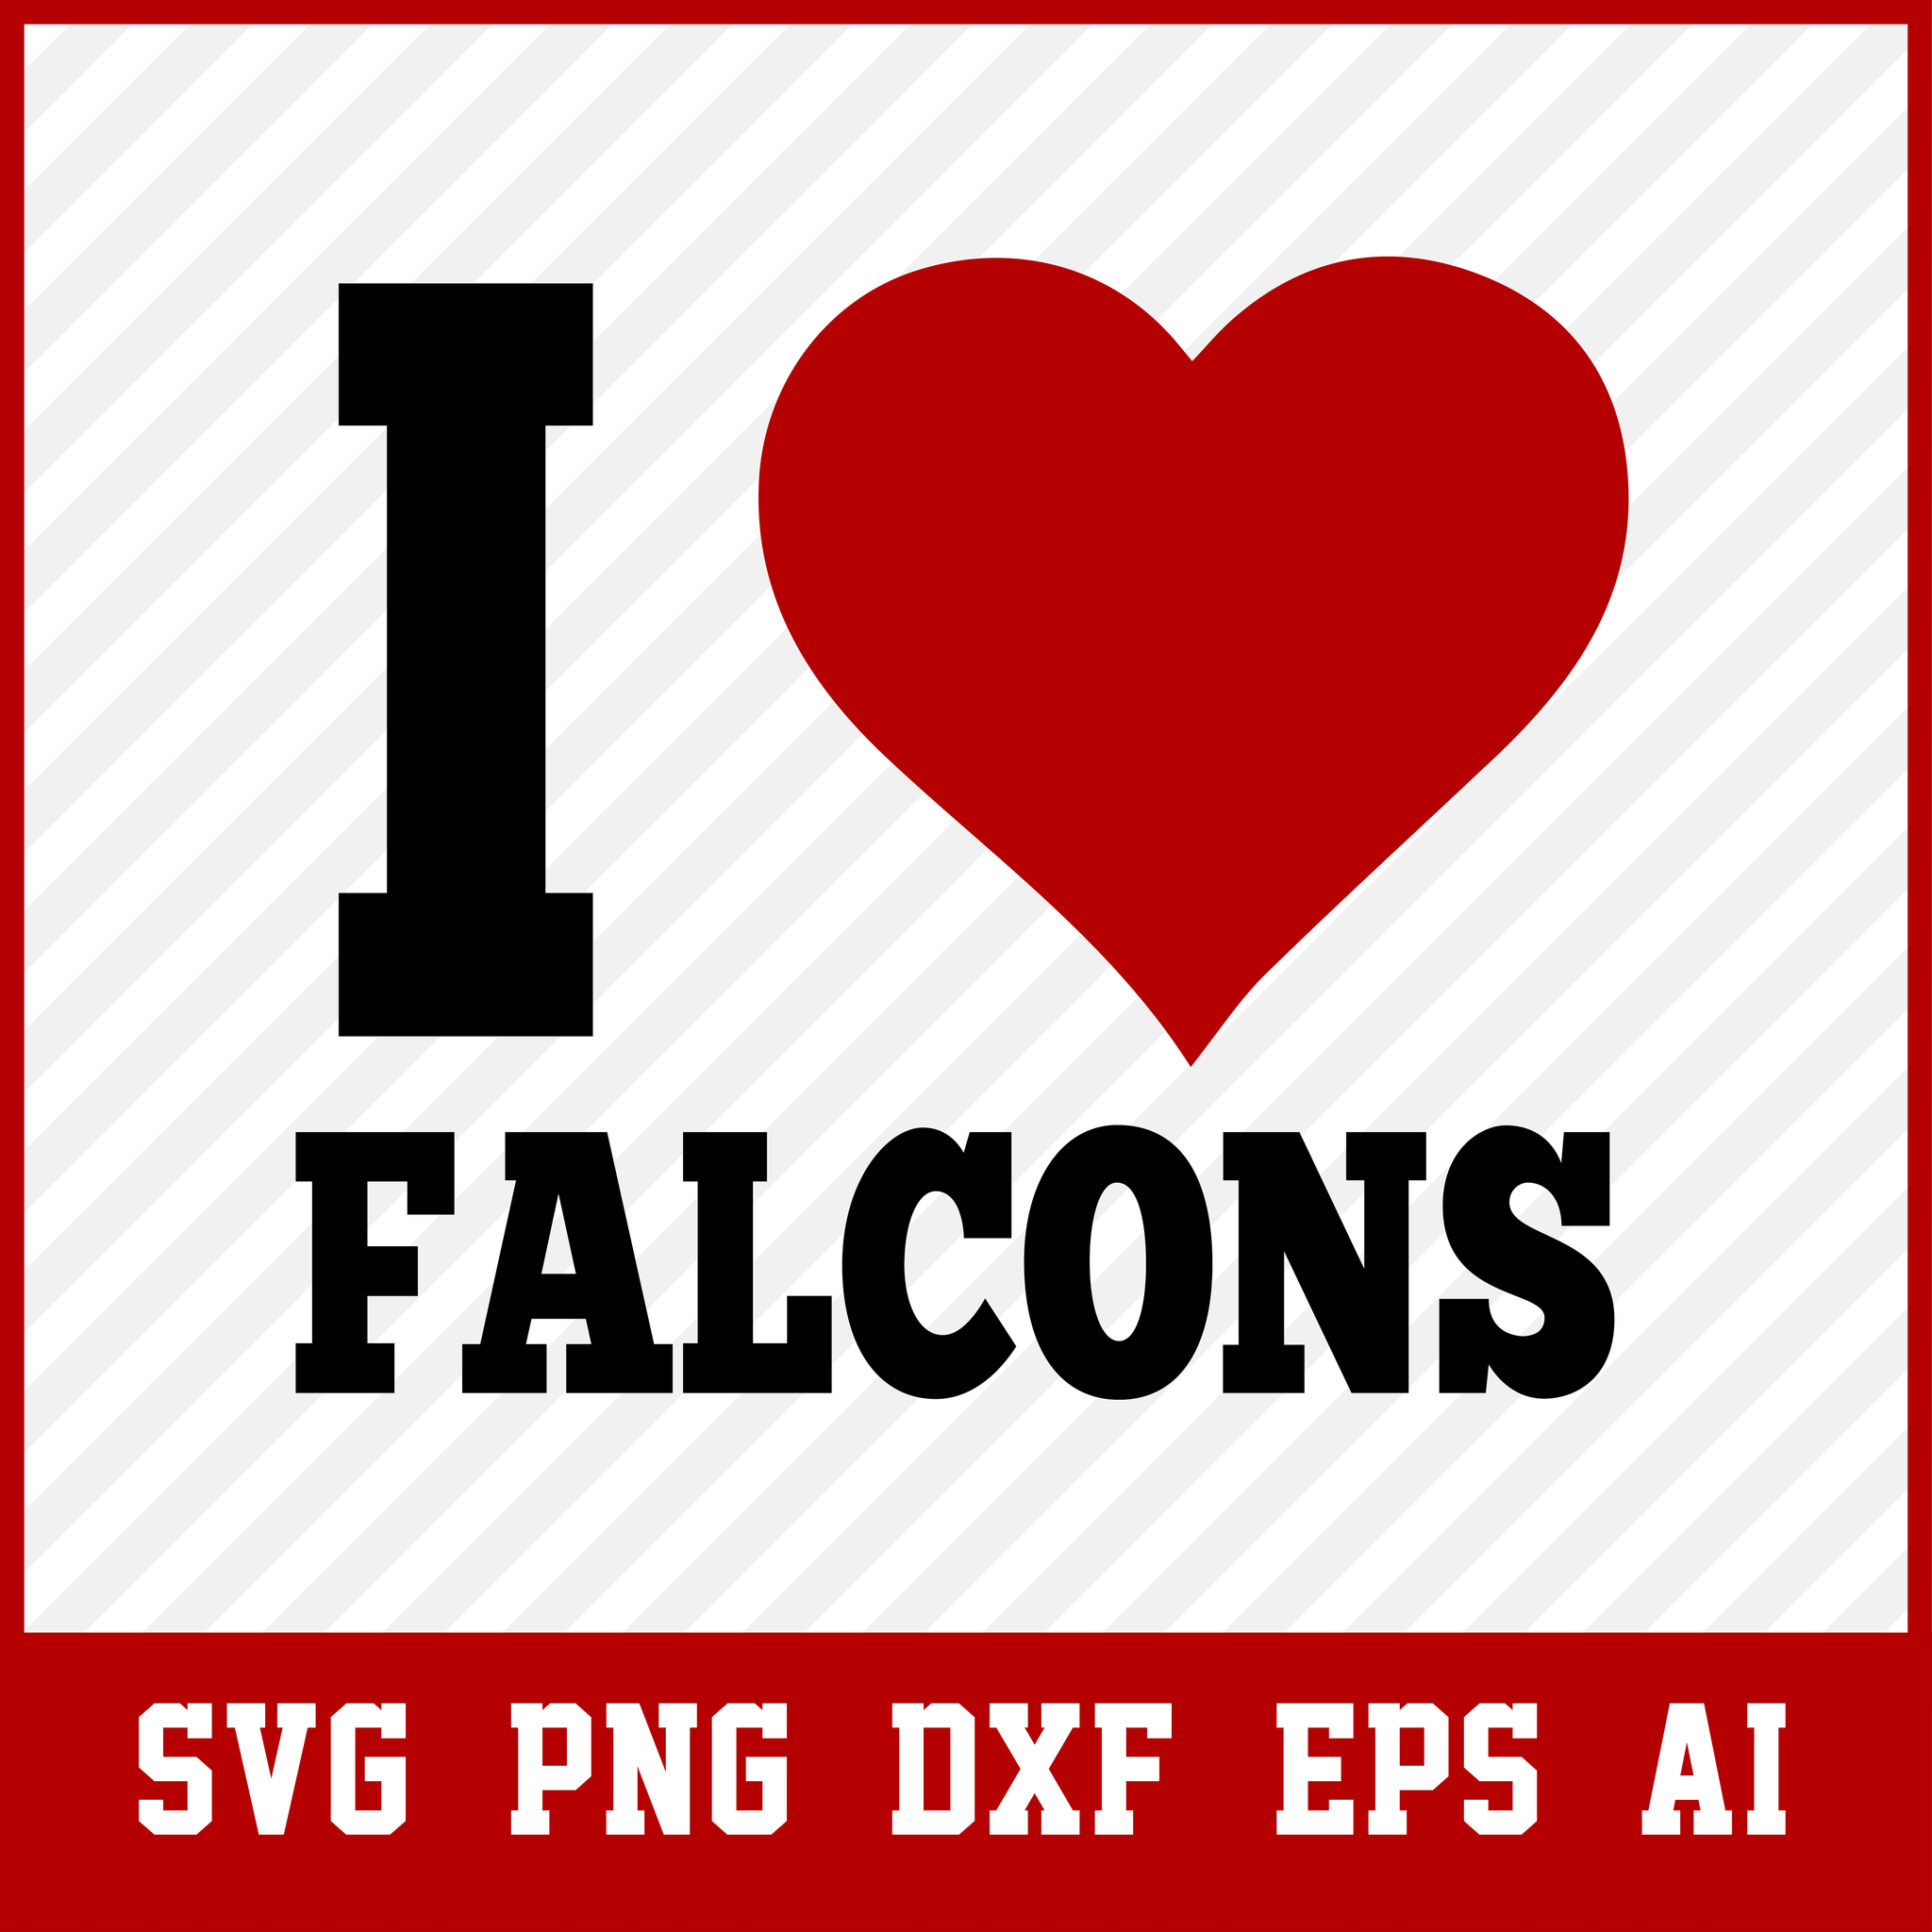 Atlanta Falcon SVG, I love Falcons Mascot Sports SVG, High School Mascot, School Spirit, Falcon Clipart Cut Files, Silhouette, NFL Svg, Svg Files For Cricut  • INSTANT Digital DOWNLOAD includes: 1 Zip and the following file formats: SVG, DXF, PNG, AI, PDF  • Artwork files are perfect for printing, resizing, coloring and modifying with the appropriate software.